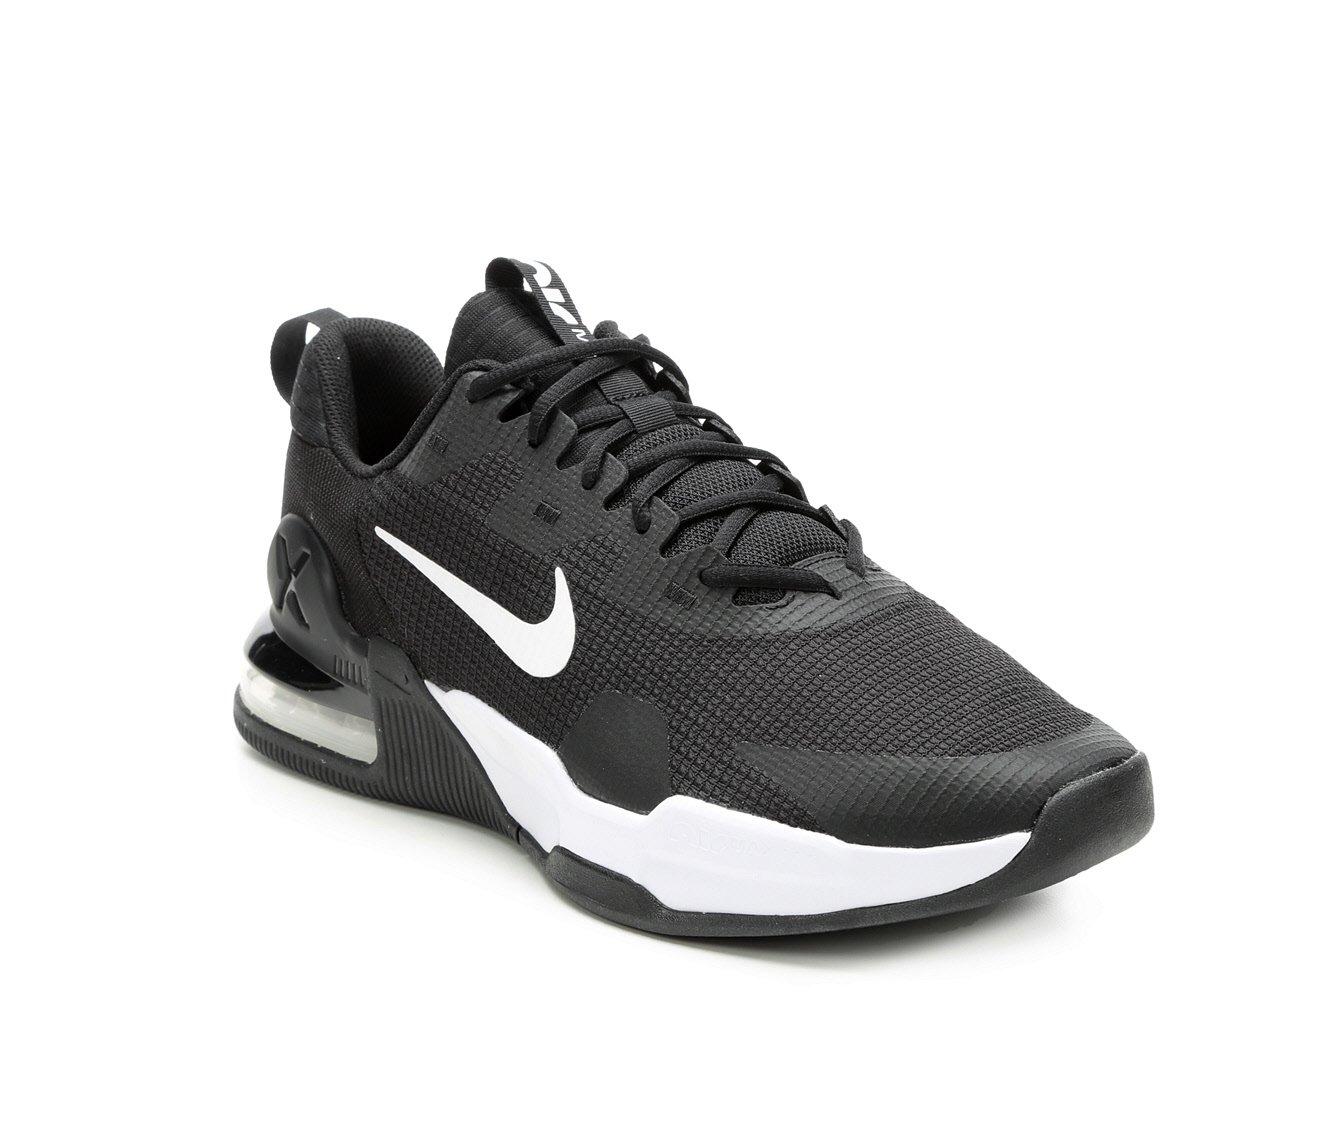 Men's Nike Max Alpha Trainer 5 Training Shoes